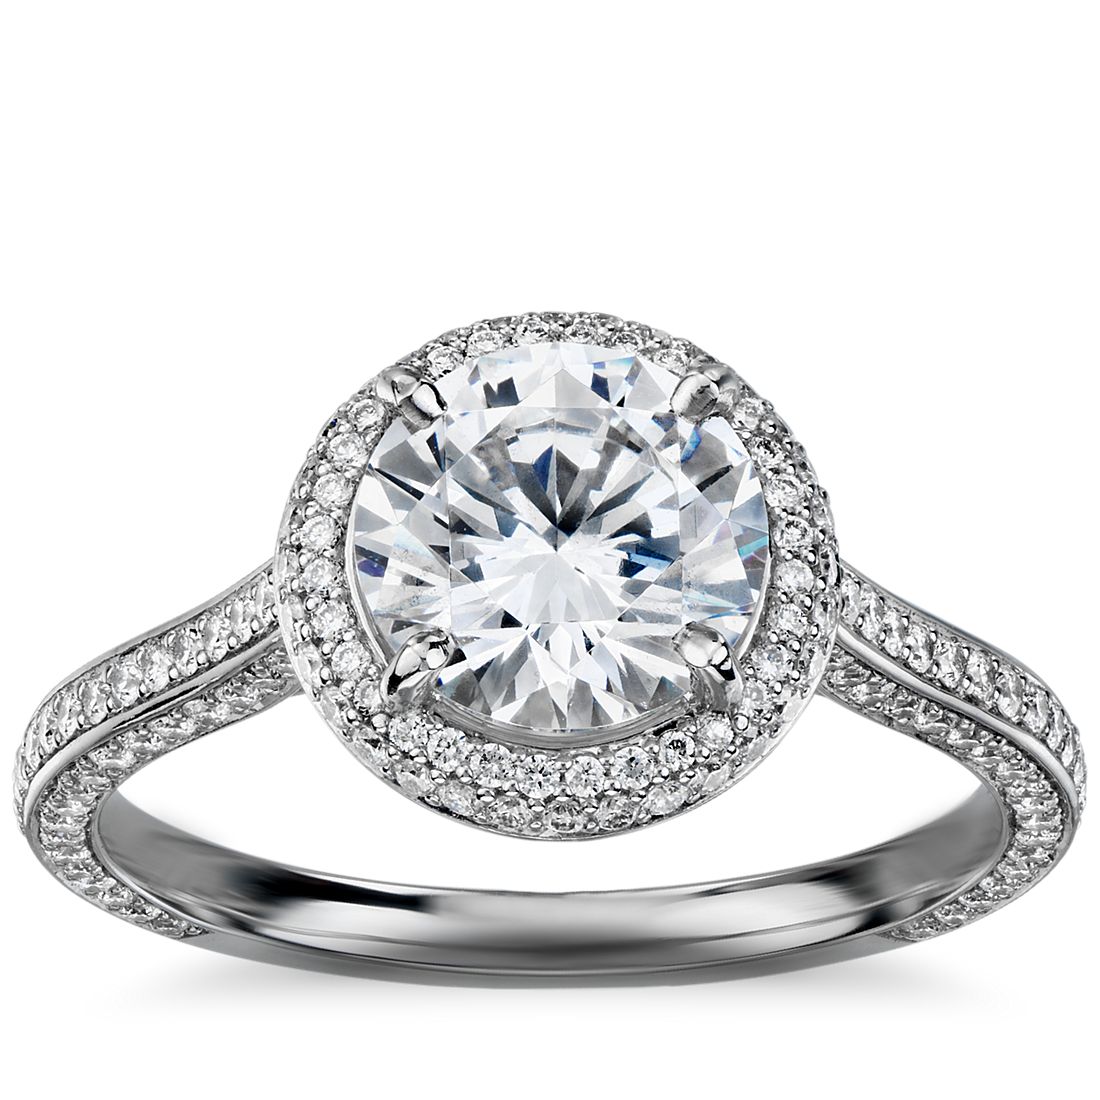 The Gallery Collection Halo Diamond Engagement Ring